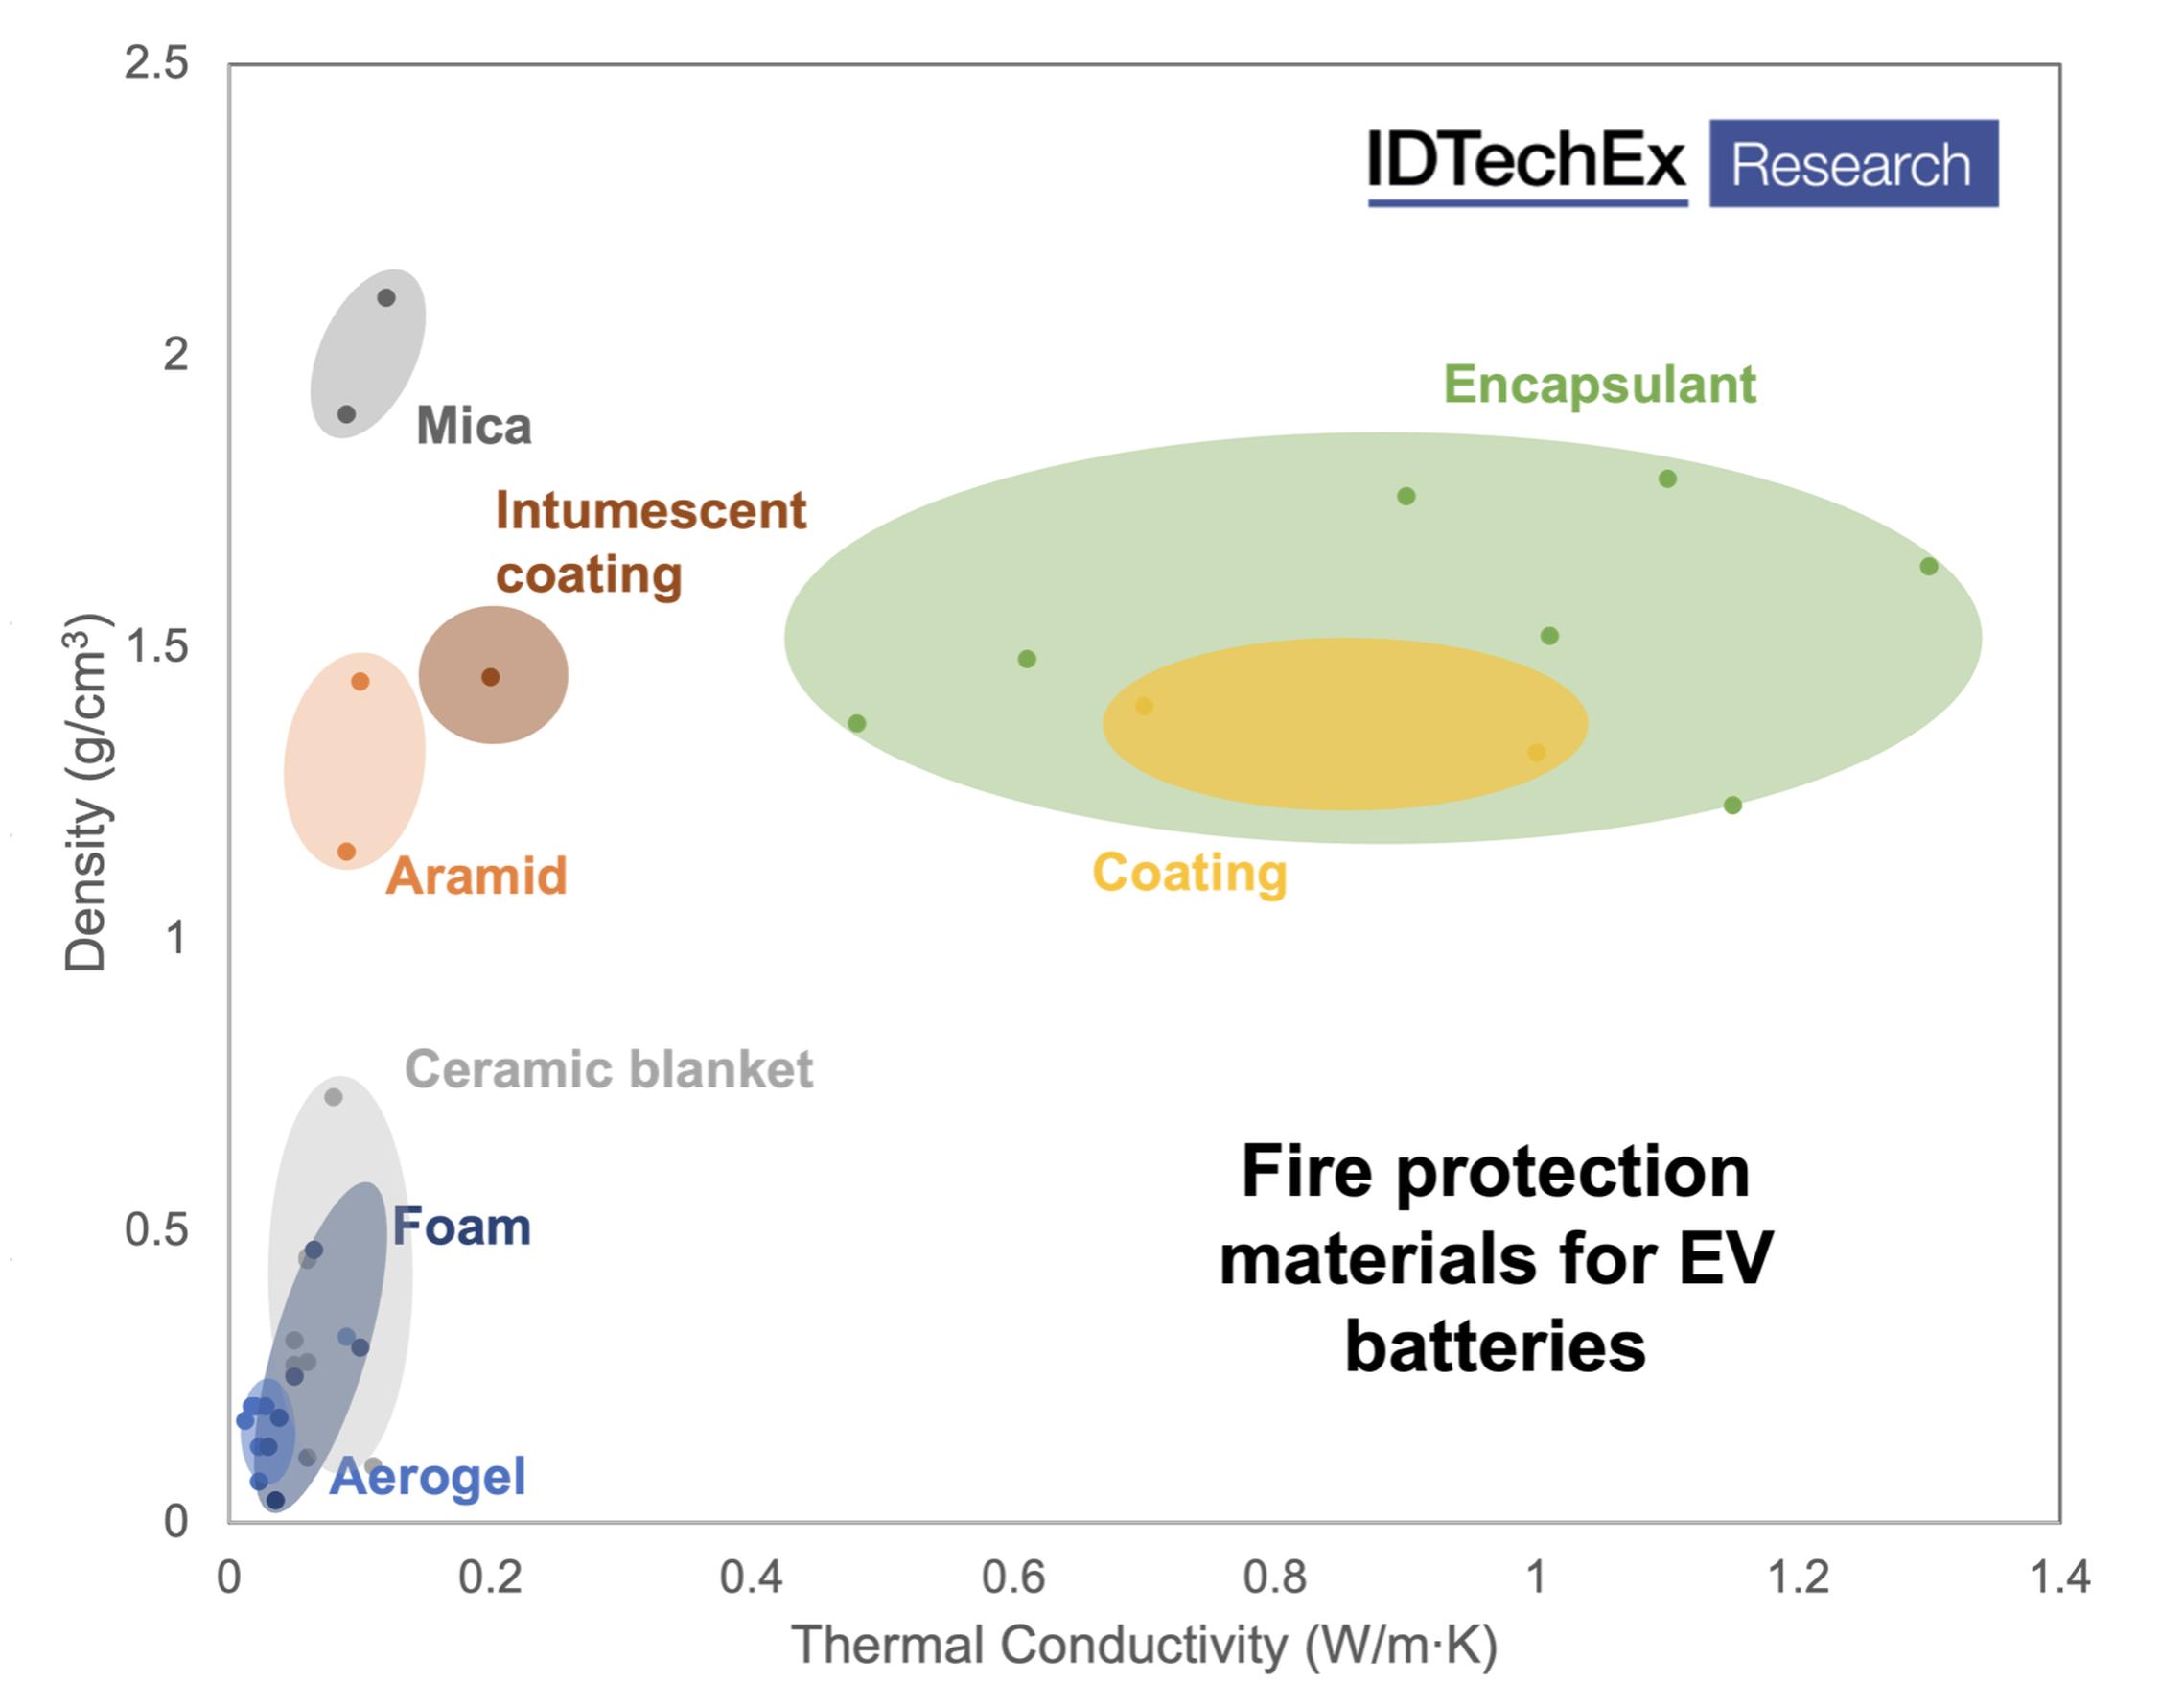 Many materials are applicable for fire protection in EV batteries